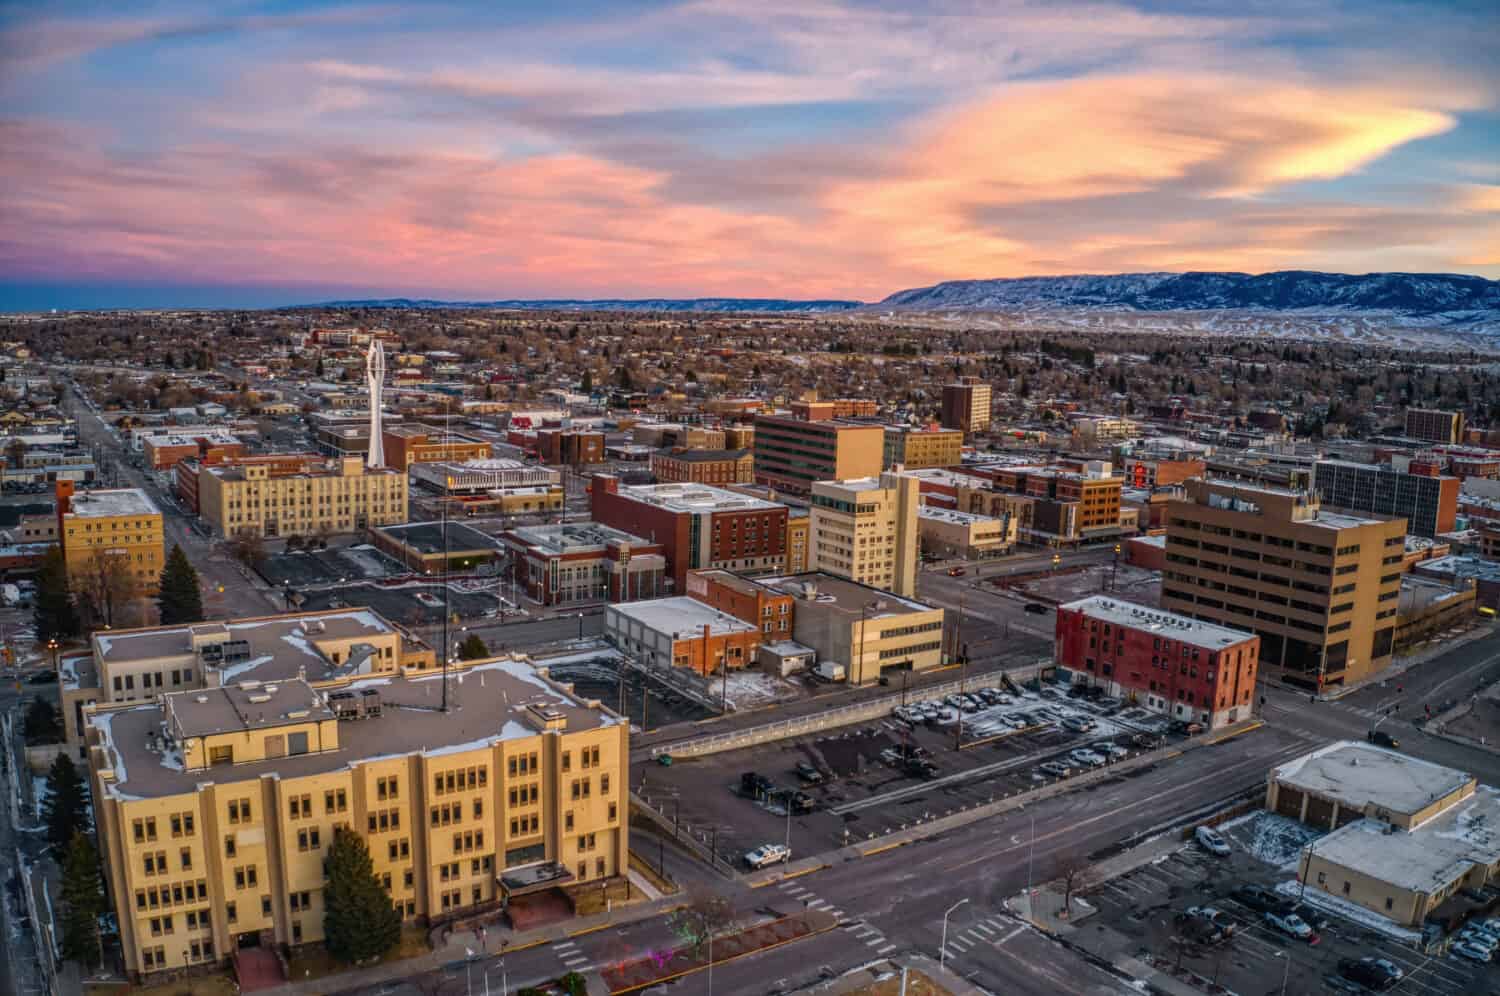 Aerial View of Downtown Casper, Wyoming at Dusk on Christmas Day by Jacob Boomsma